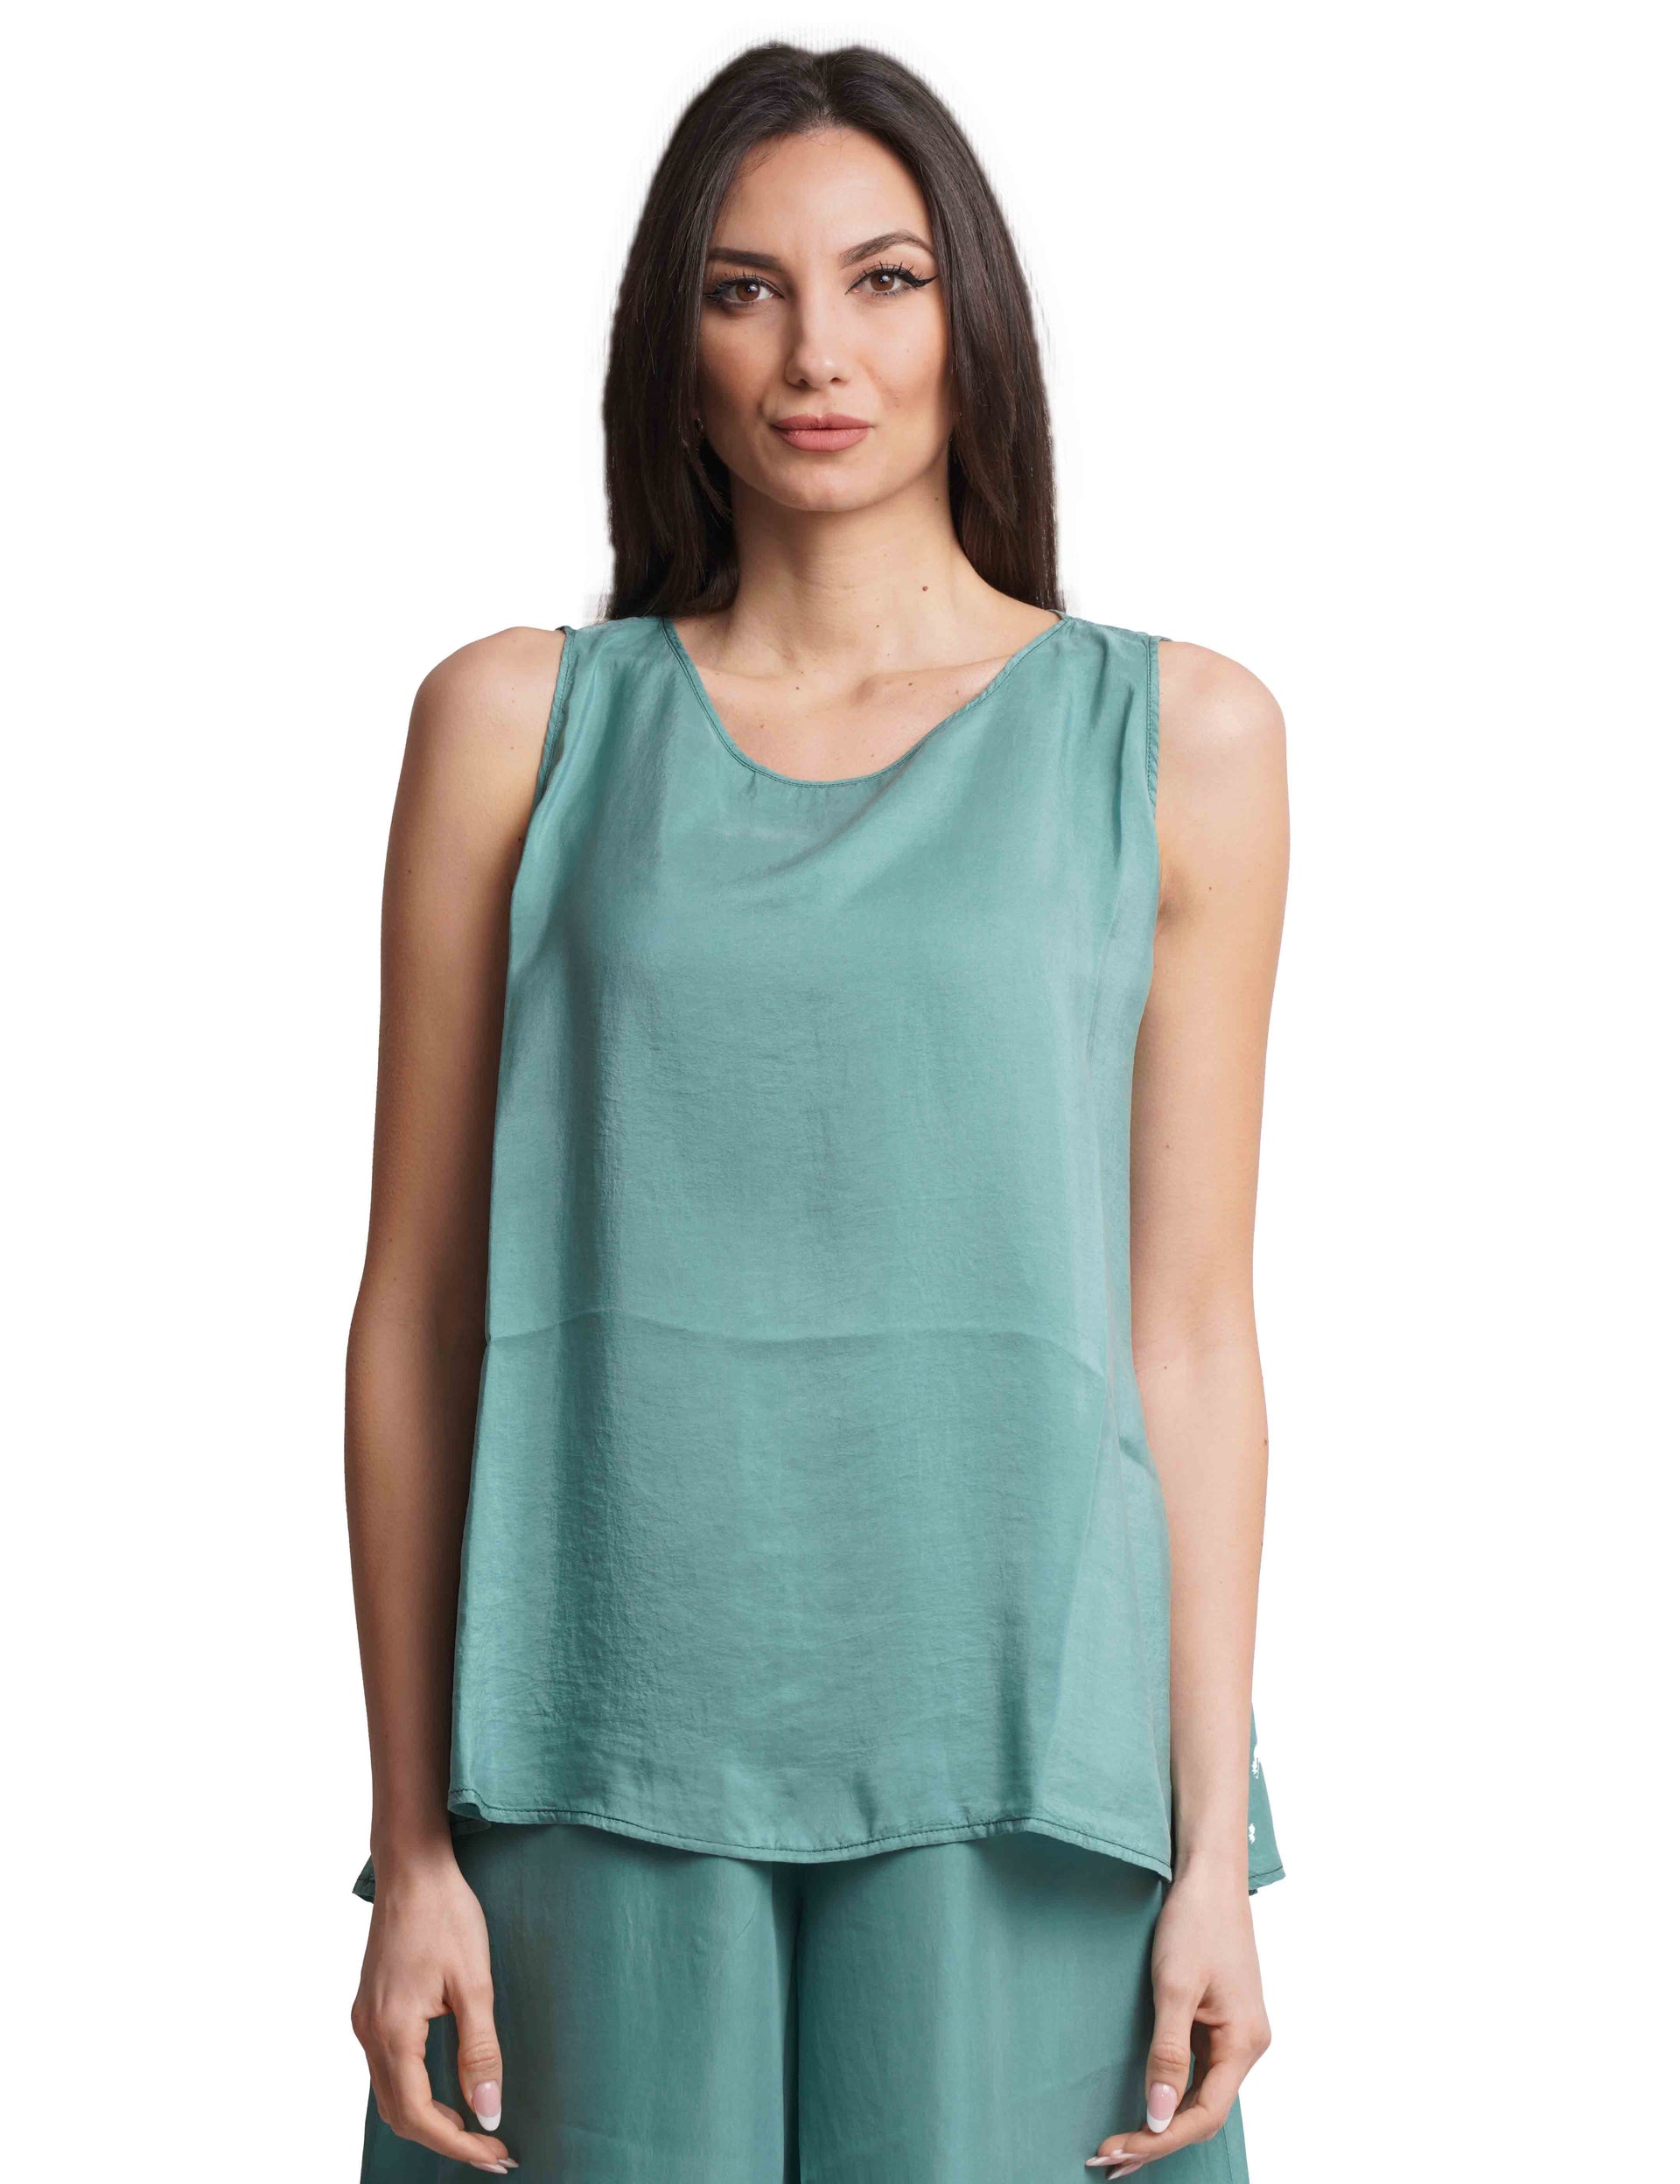 Women's green silk top wide at the bottom